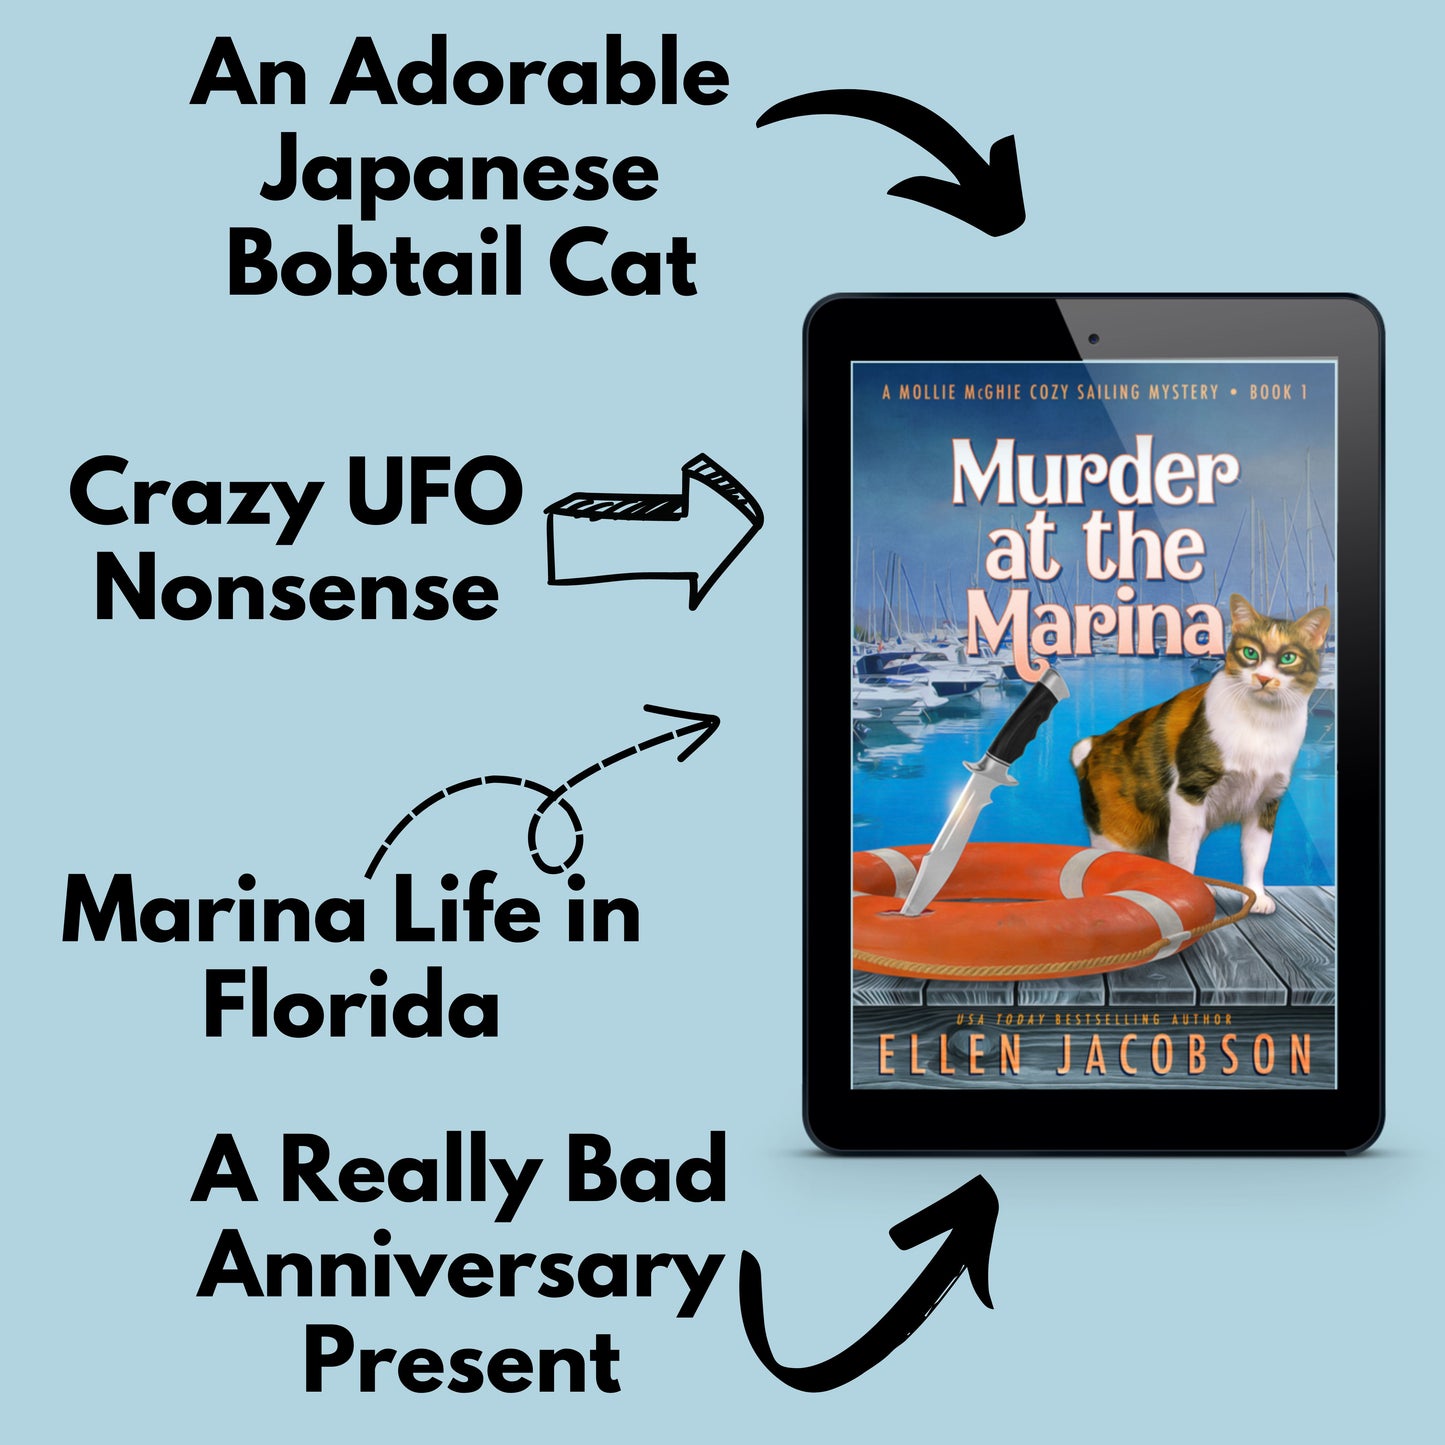 Murder at the Marina (Mollie McGhie Cozy Mystery #1) ebook cover with text that says an adorable Japanese bobtail cat, crazy UFO nonsense, marina life in Florida, and a really bad anniversary present